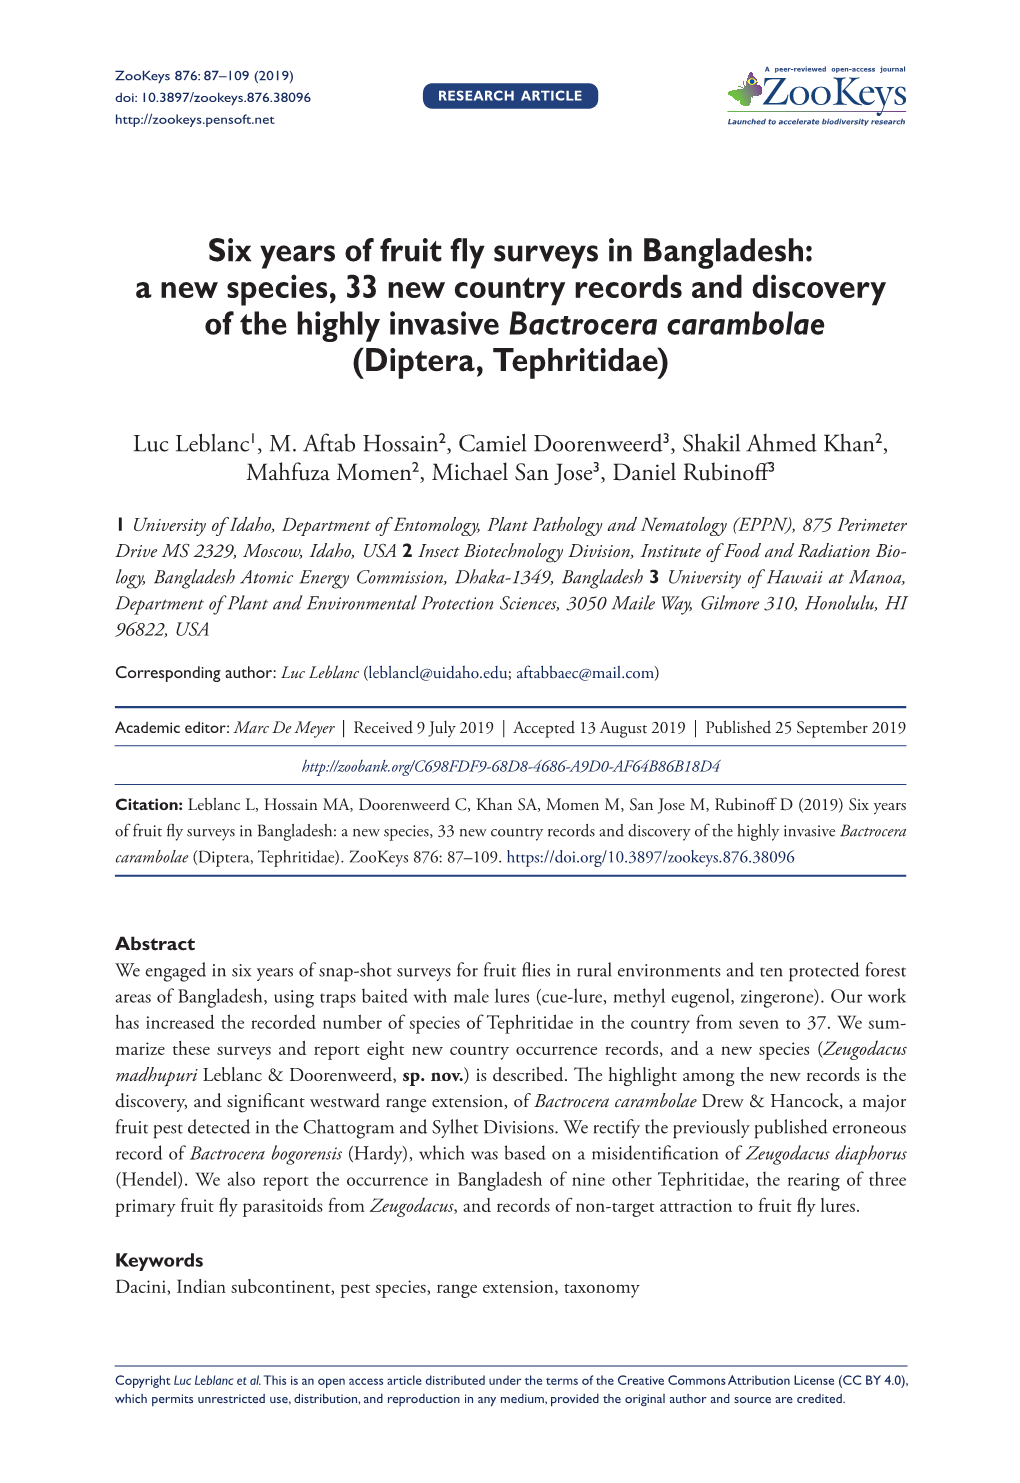 Six Years of Fruit Fly Surveys in Bangladesh: a New Species, 33 New Country Records and Discovery of the Highly Invasive Bactrocera Carambolae (Diptera, Tephritidae)